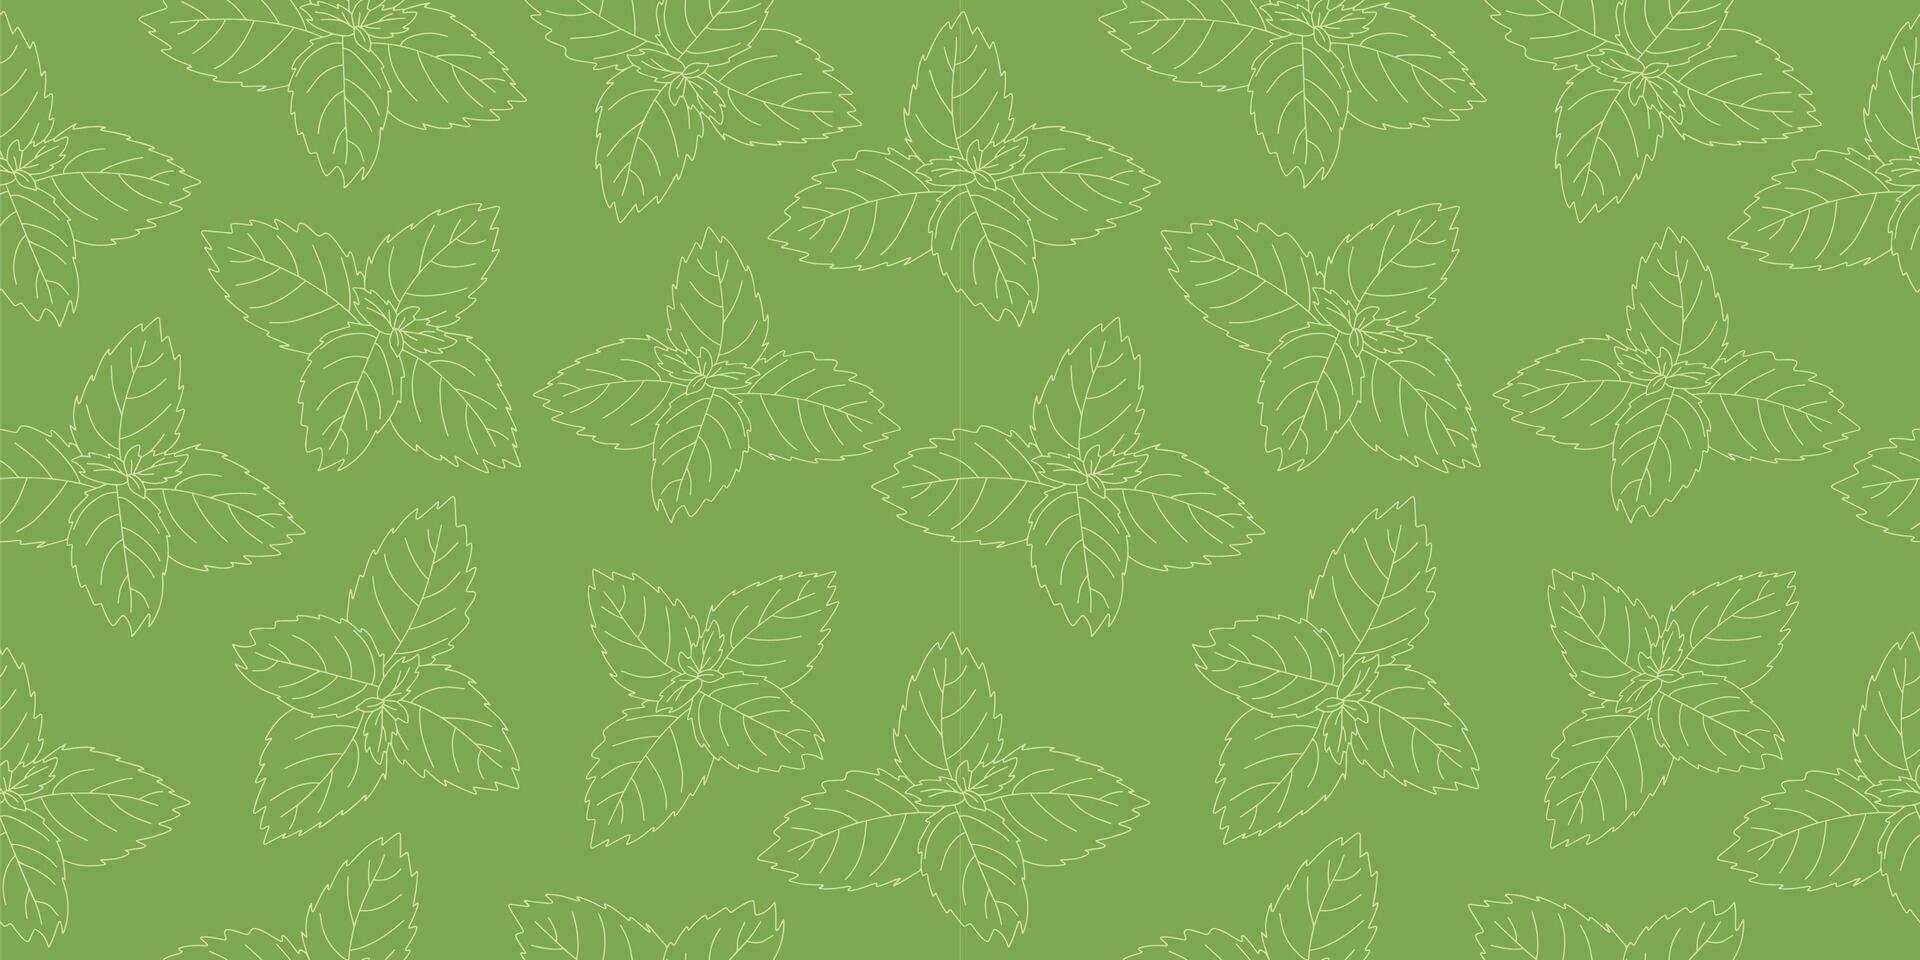 Seamless pattern of mint leaf icon. Isolated illustration of a mint leaf icon in linear style on a green background vector